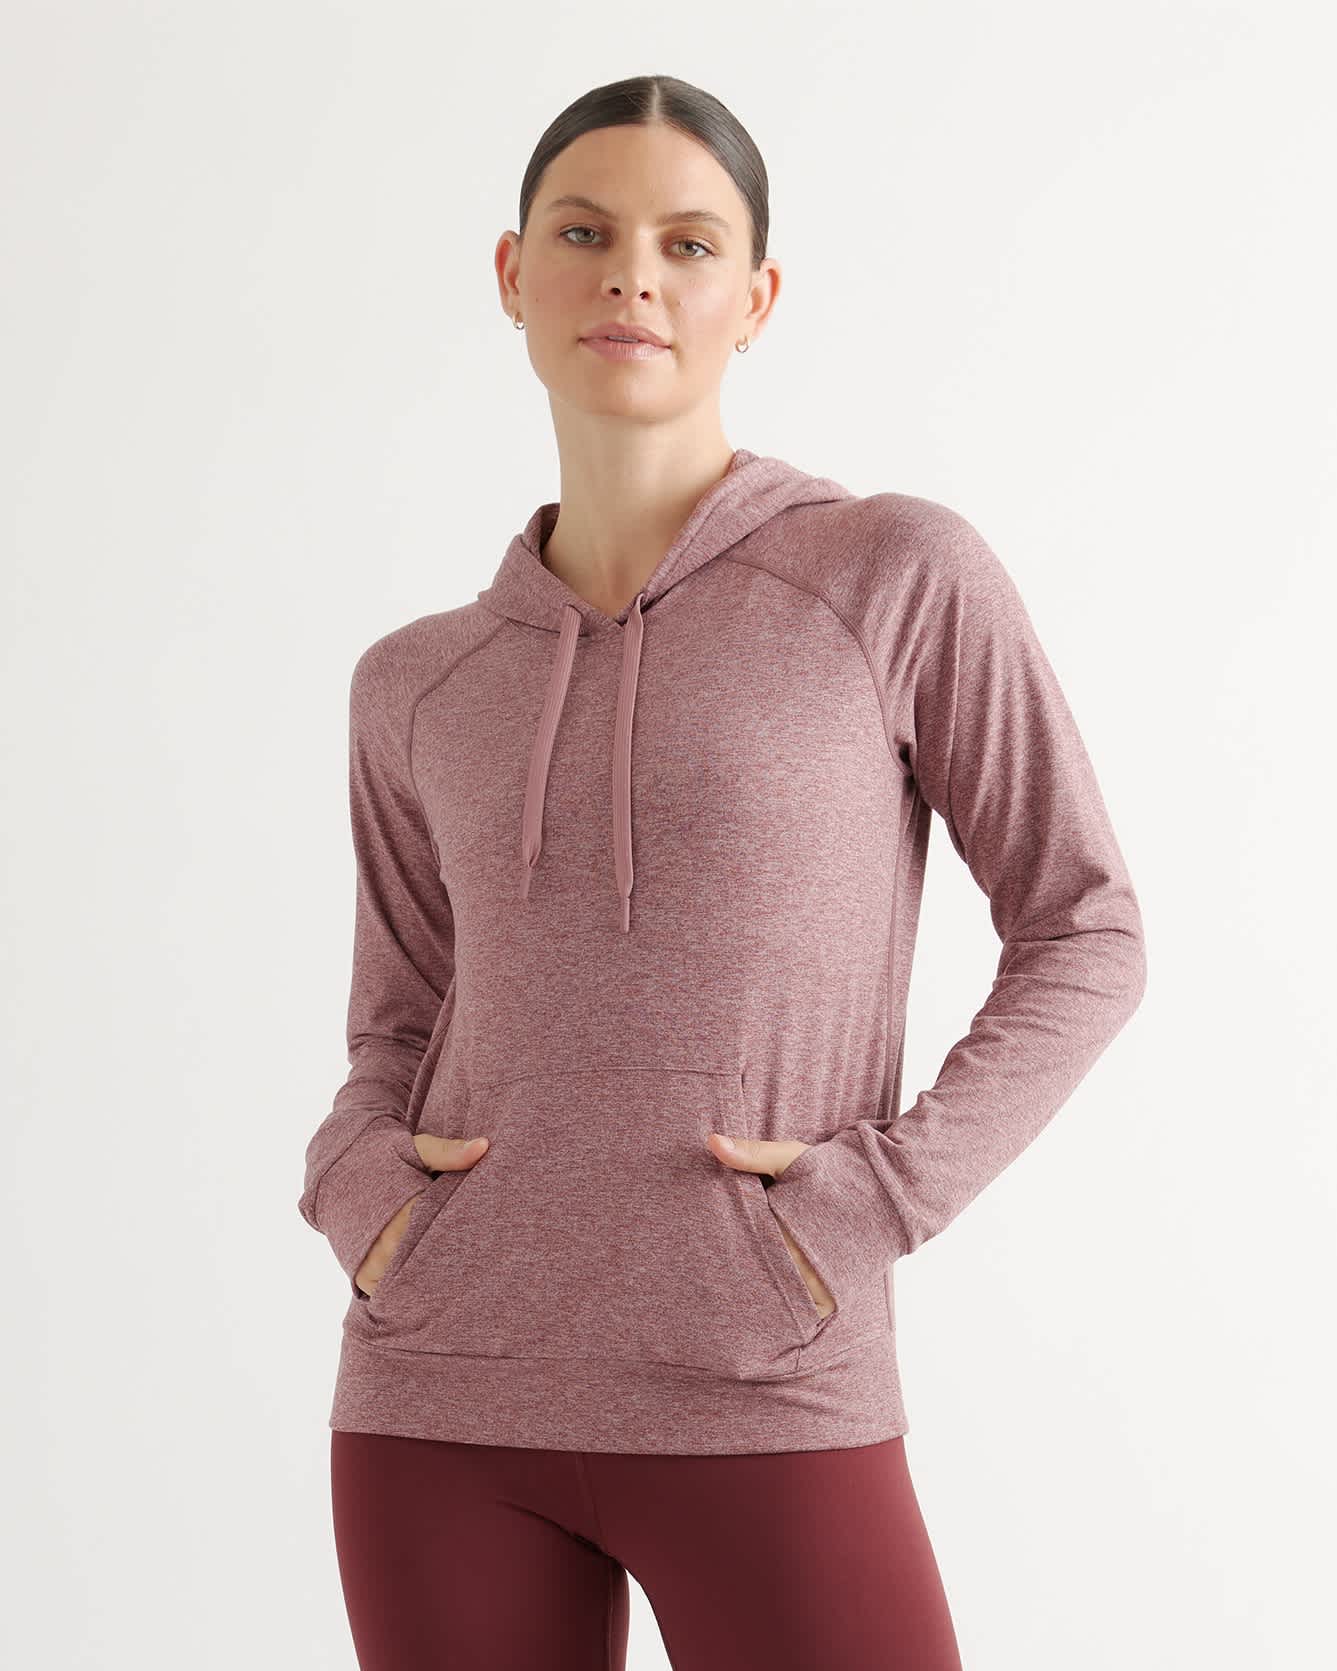 Flowknit Ultra-Soft Performance Pullover Hoodie - Heather Rose